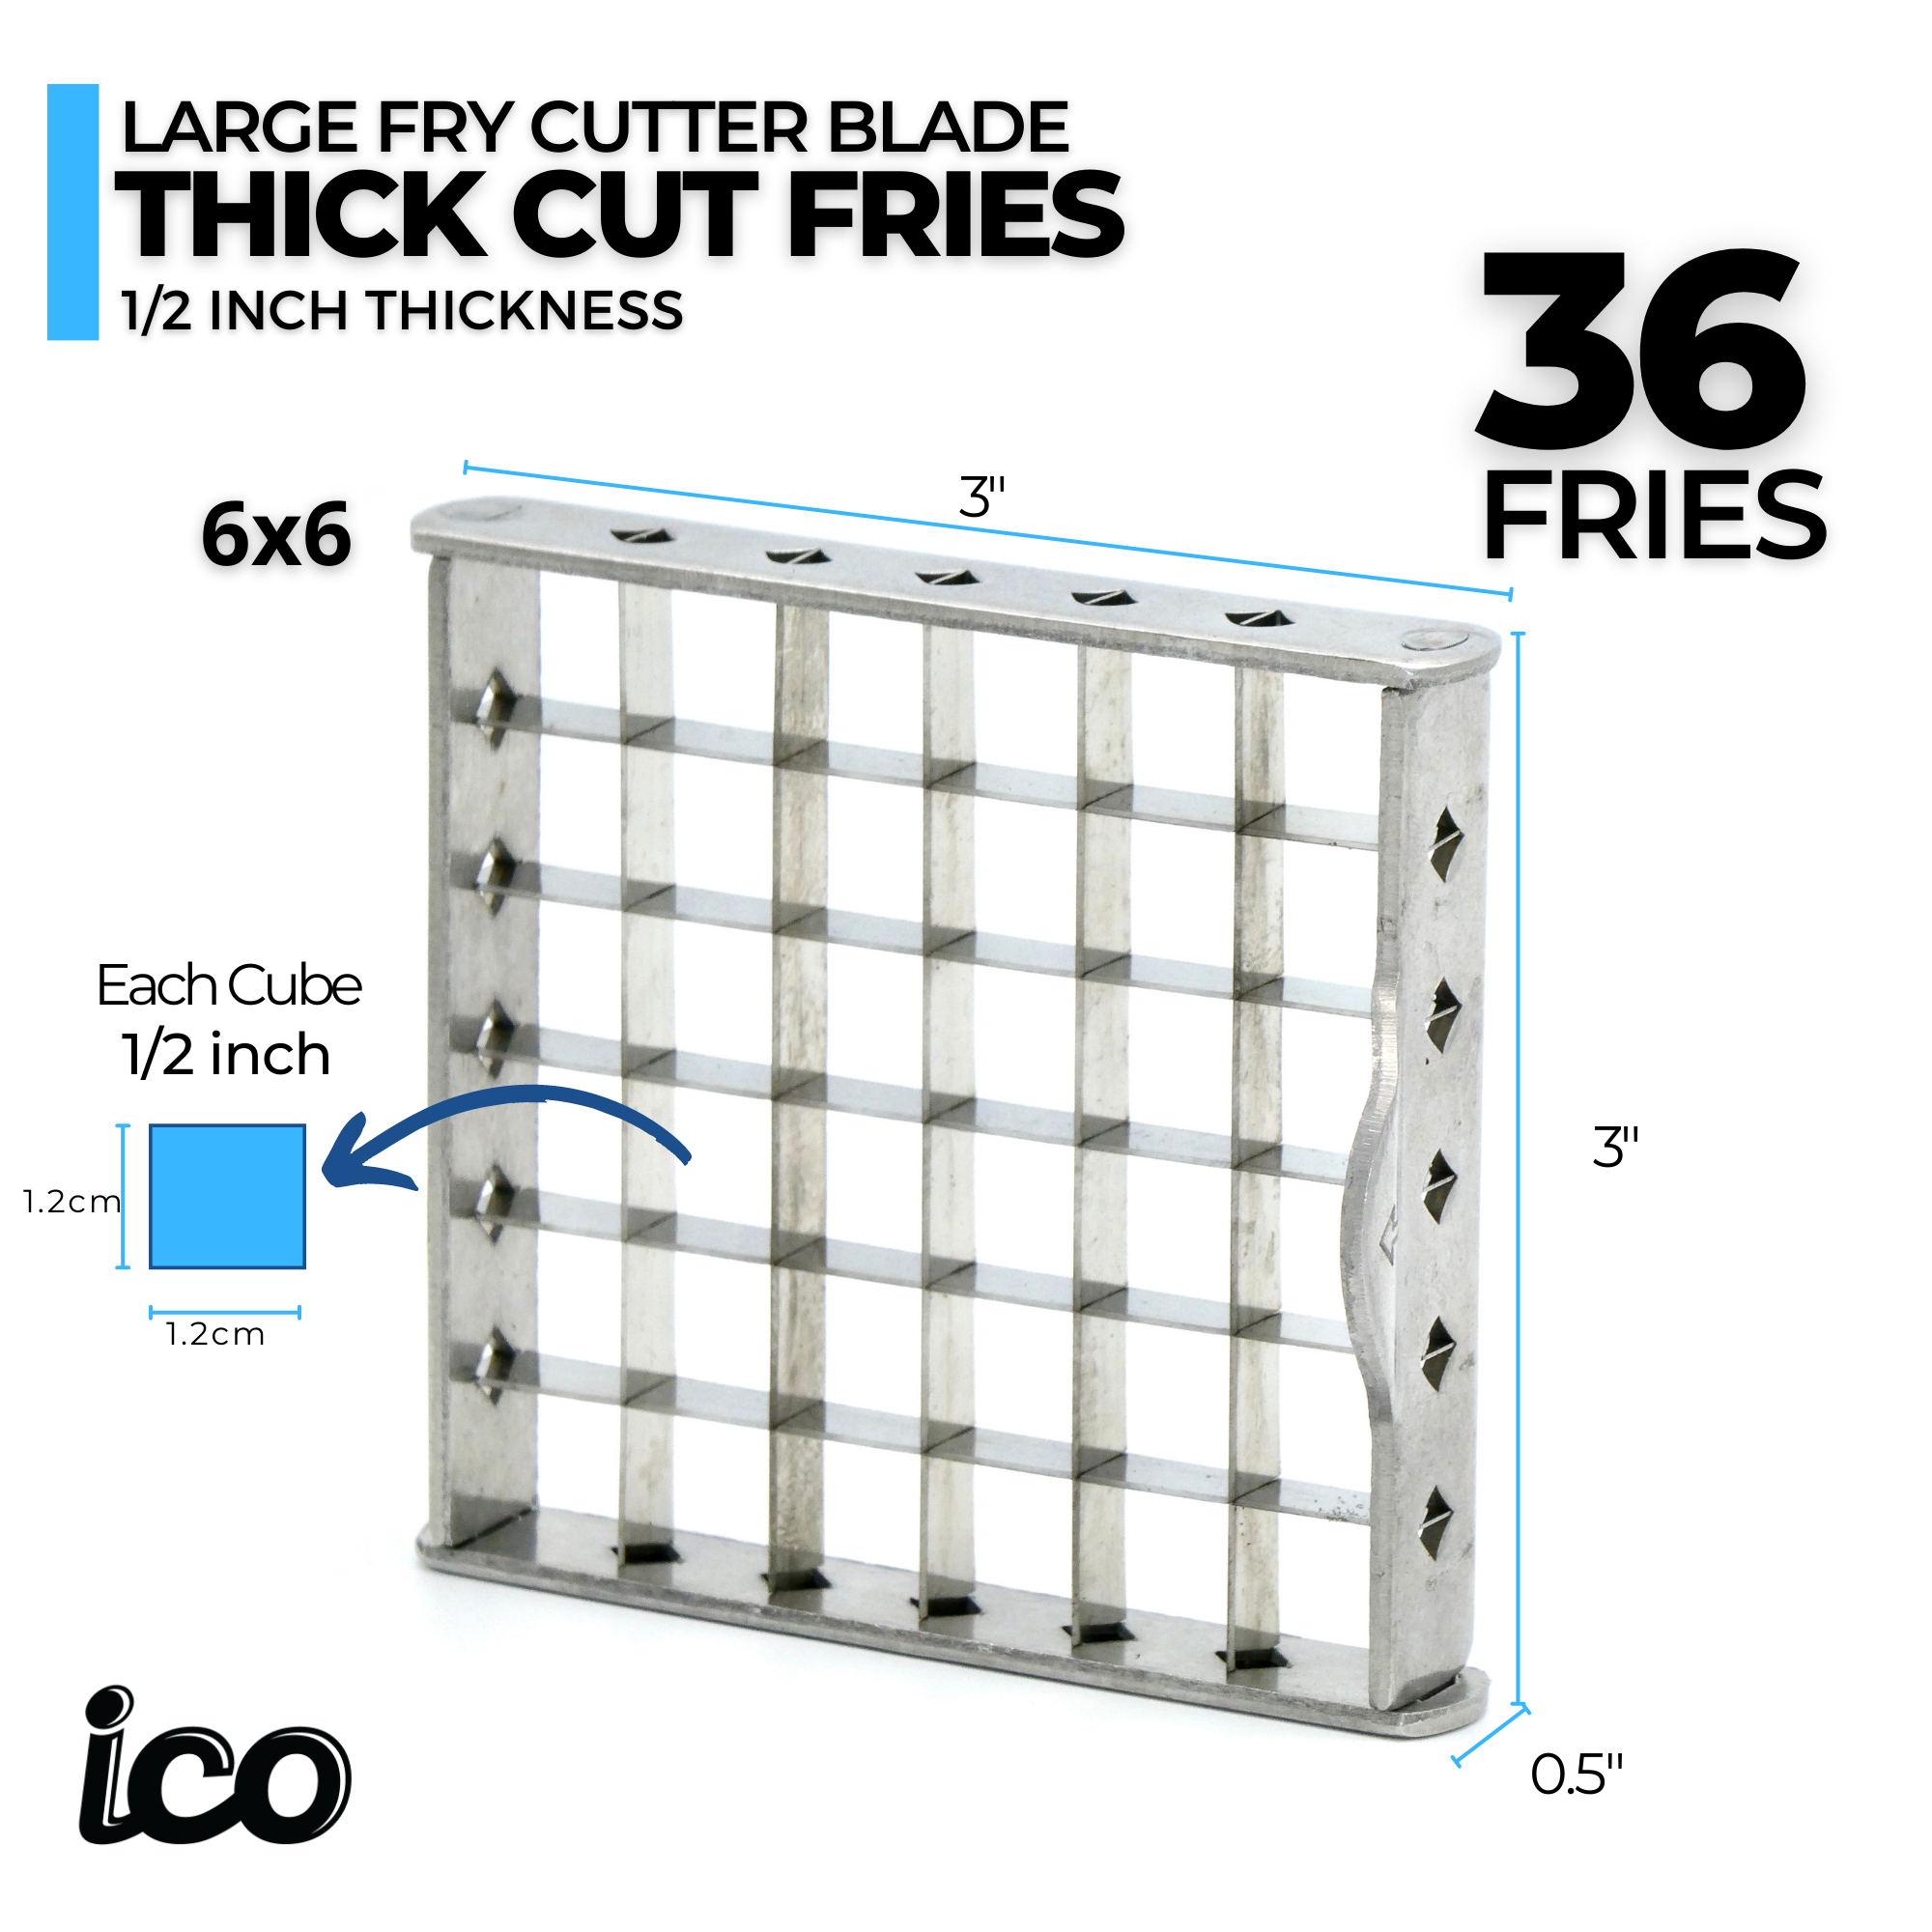 ICO Replacement Fry Cutter LARGE Blade with Pusher